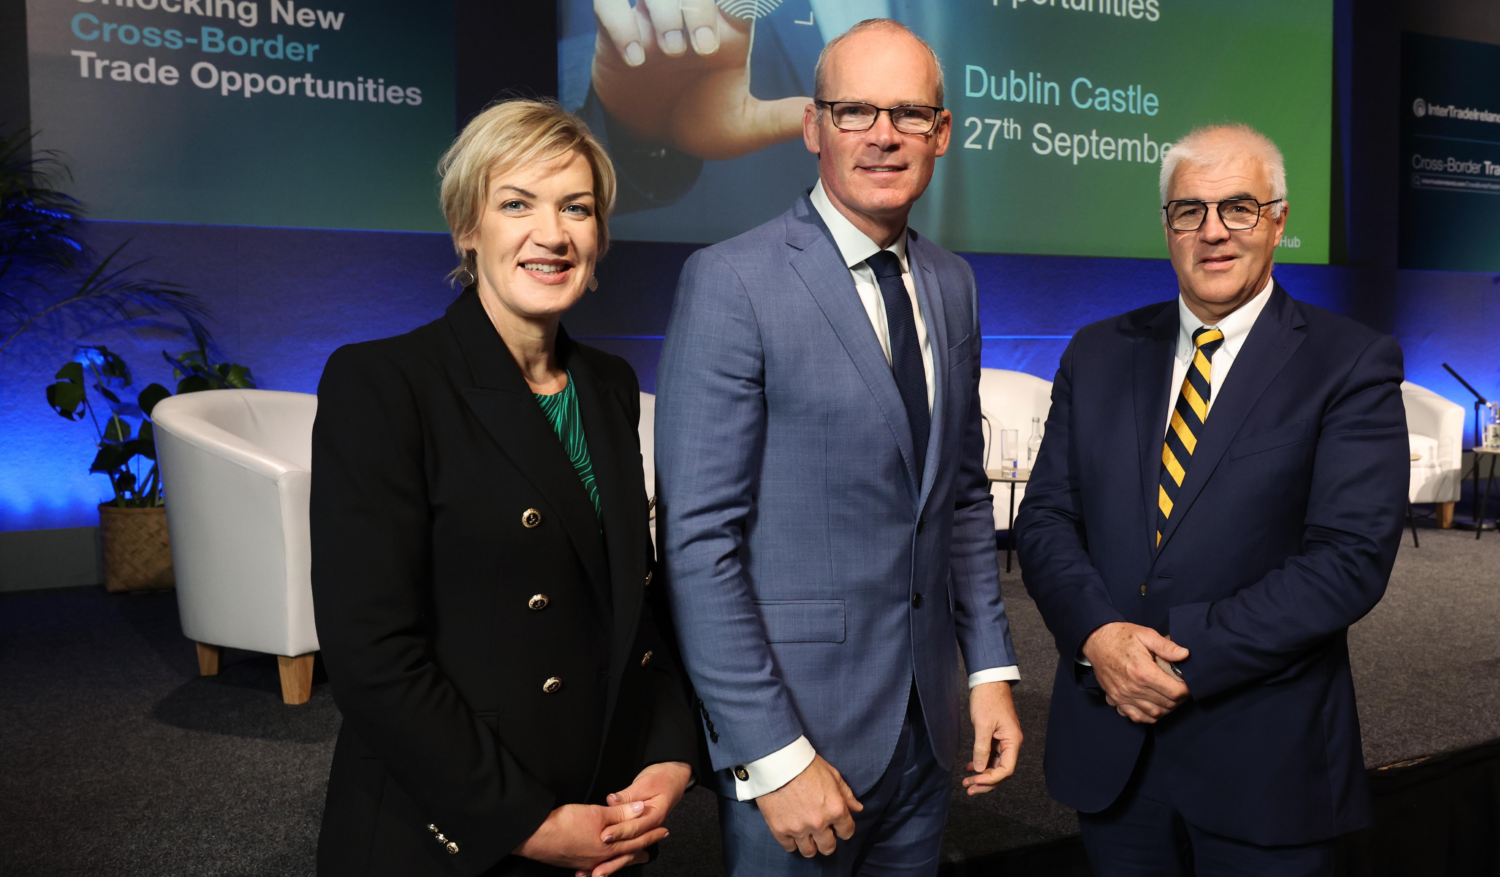 Margaret Hearty CEO Inter Trade Ireland Minister for Enterprise Simon Coveney TD and Richard Kennedy Chairman Inter Trade Ireland at the launch of the new cross border trade hub in Dublin Castle